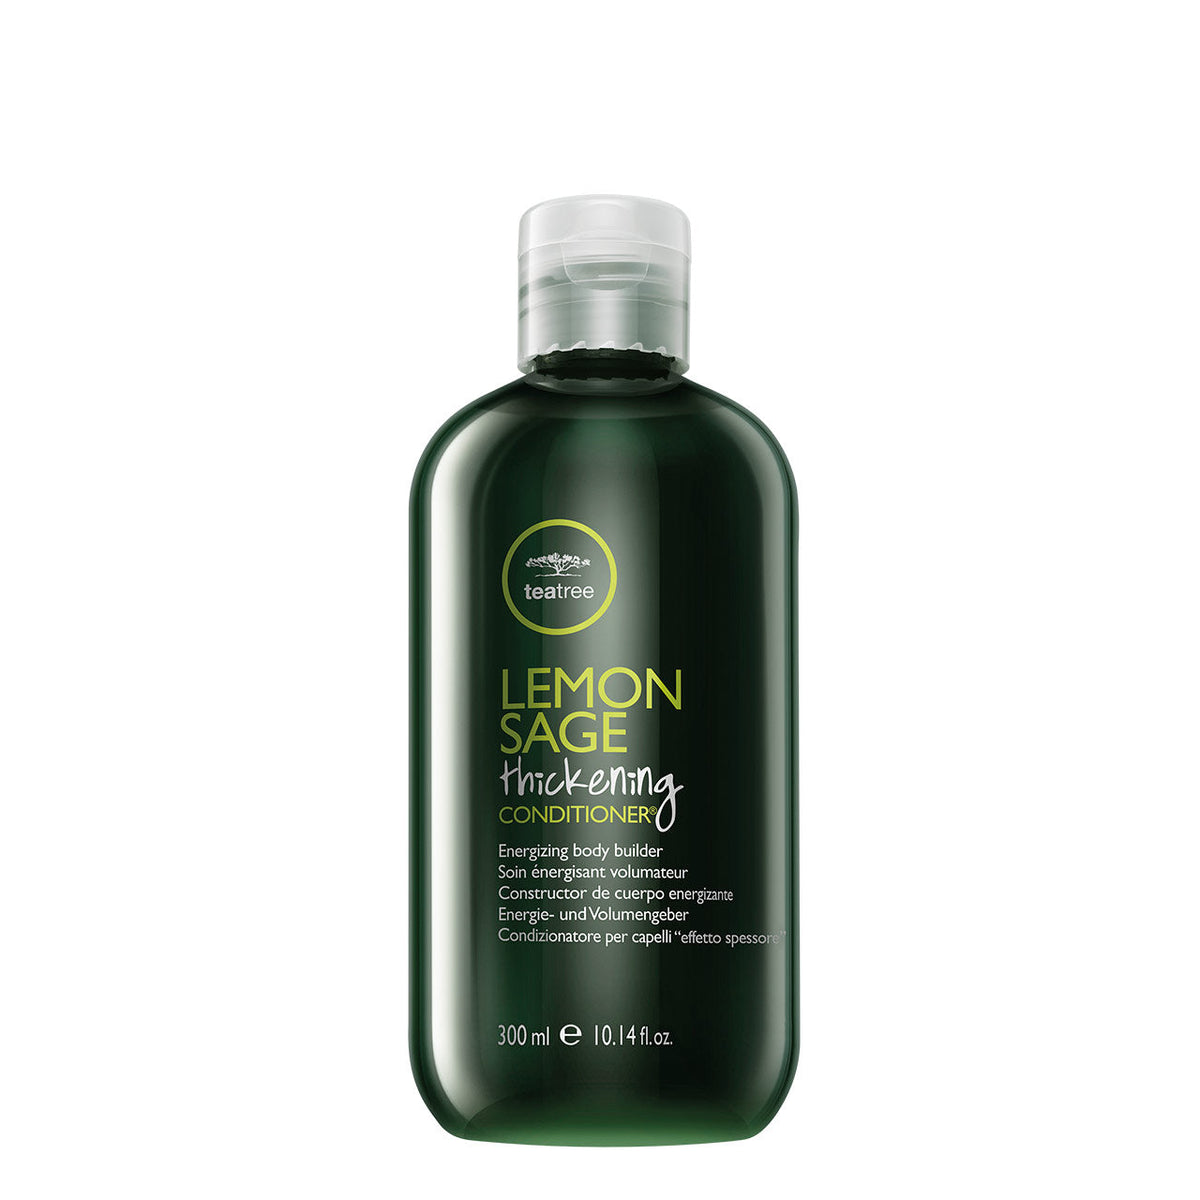 Tea Tree Lemon Sage Thickening Conditioner - 300ML - by Paul Mitchell |ProCare Outlet|